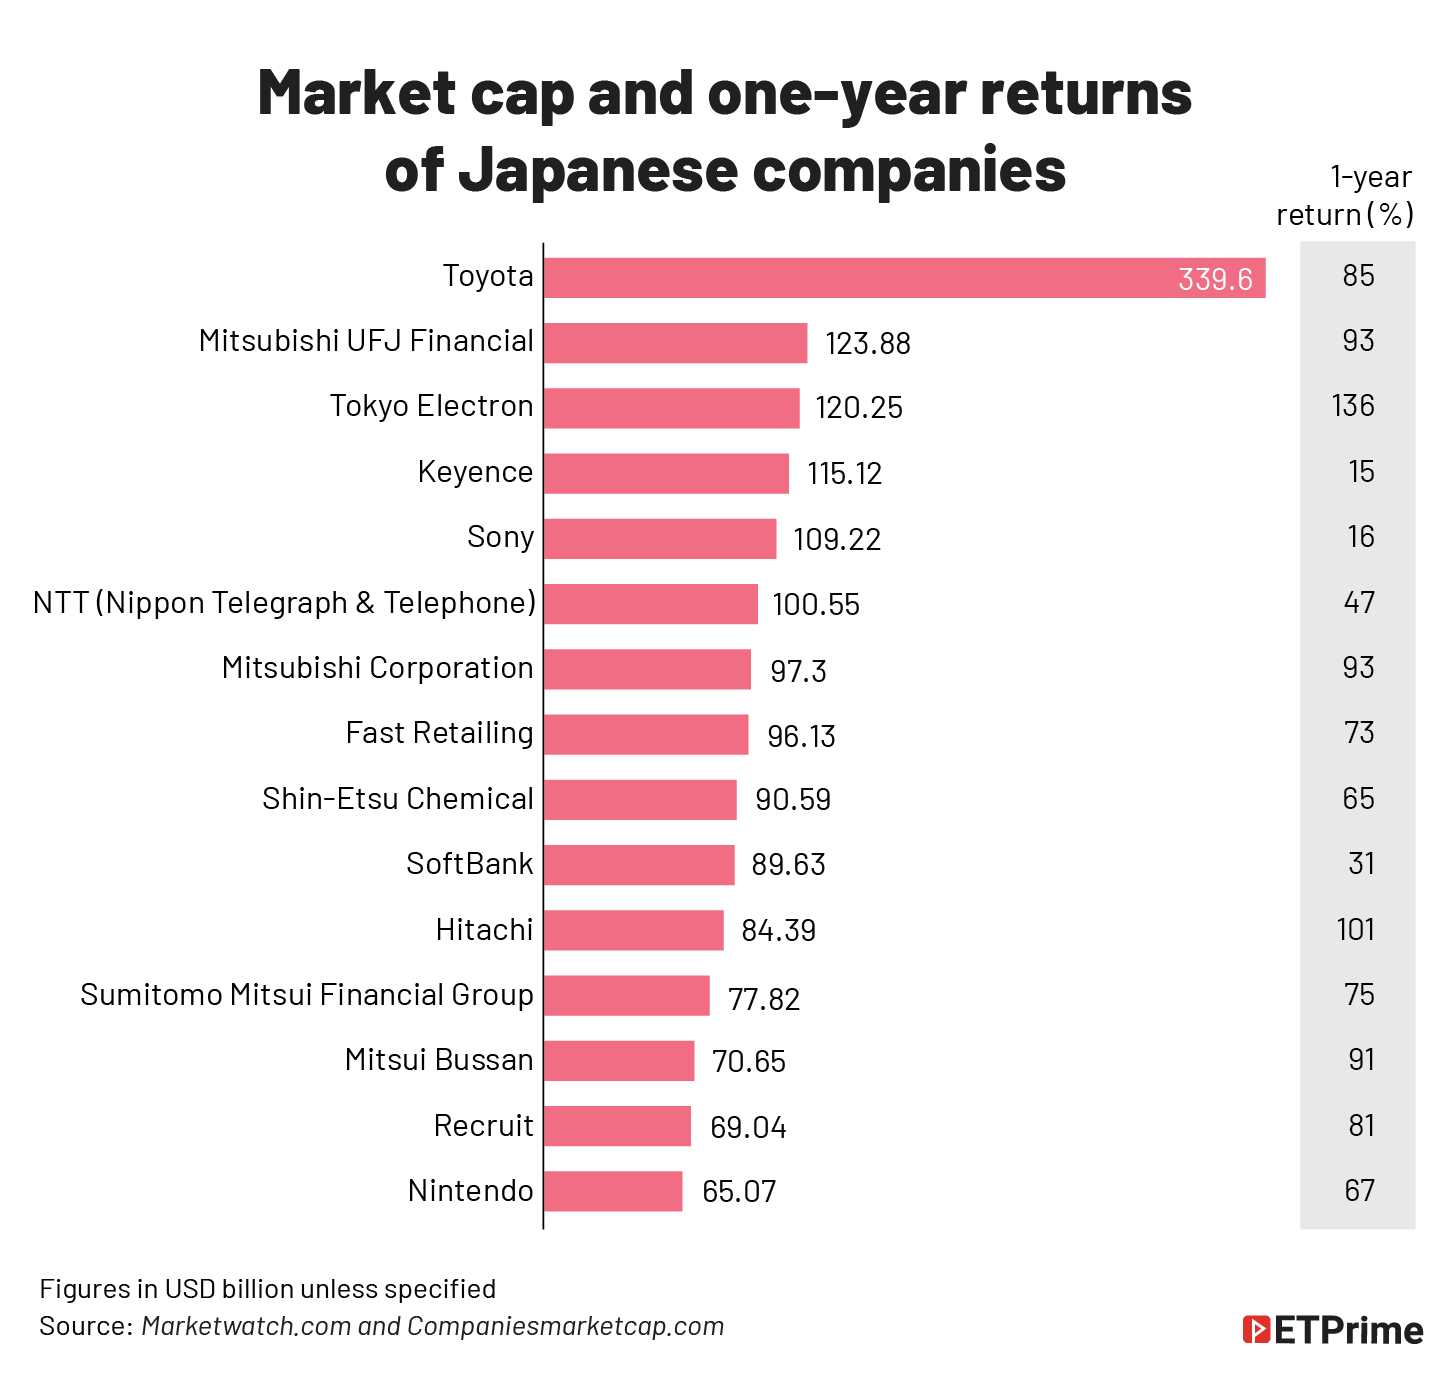 Market cap and one-year returns of Japanese companies@2x